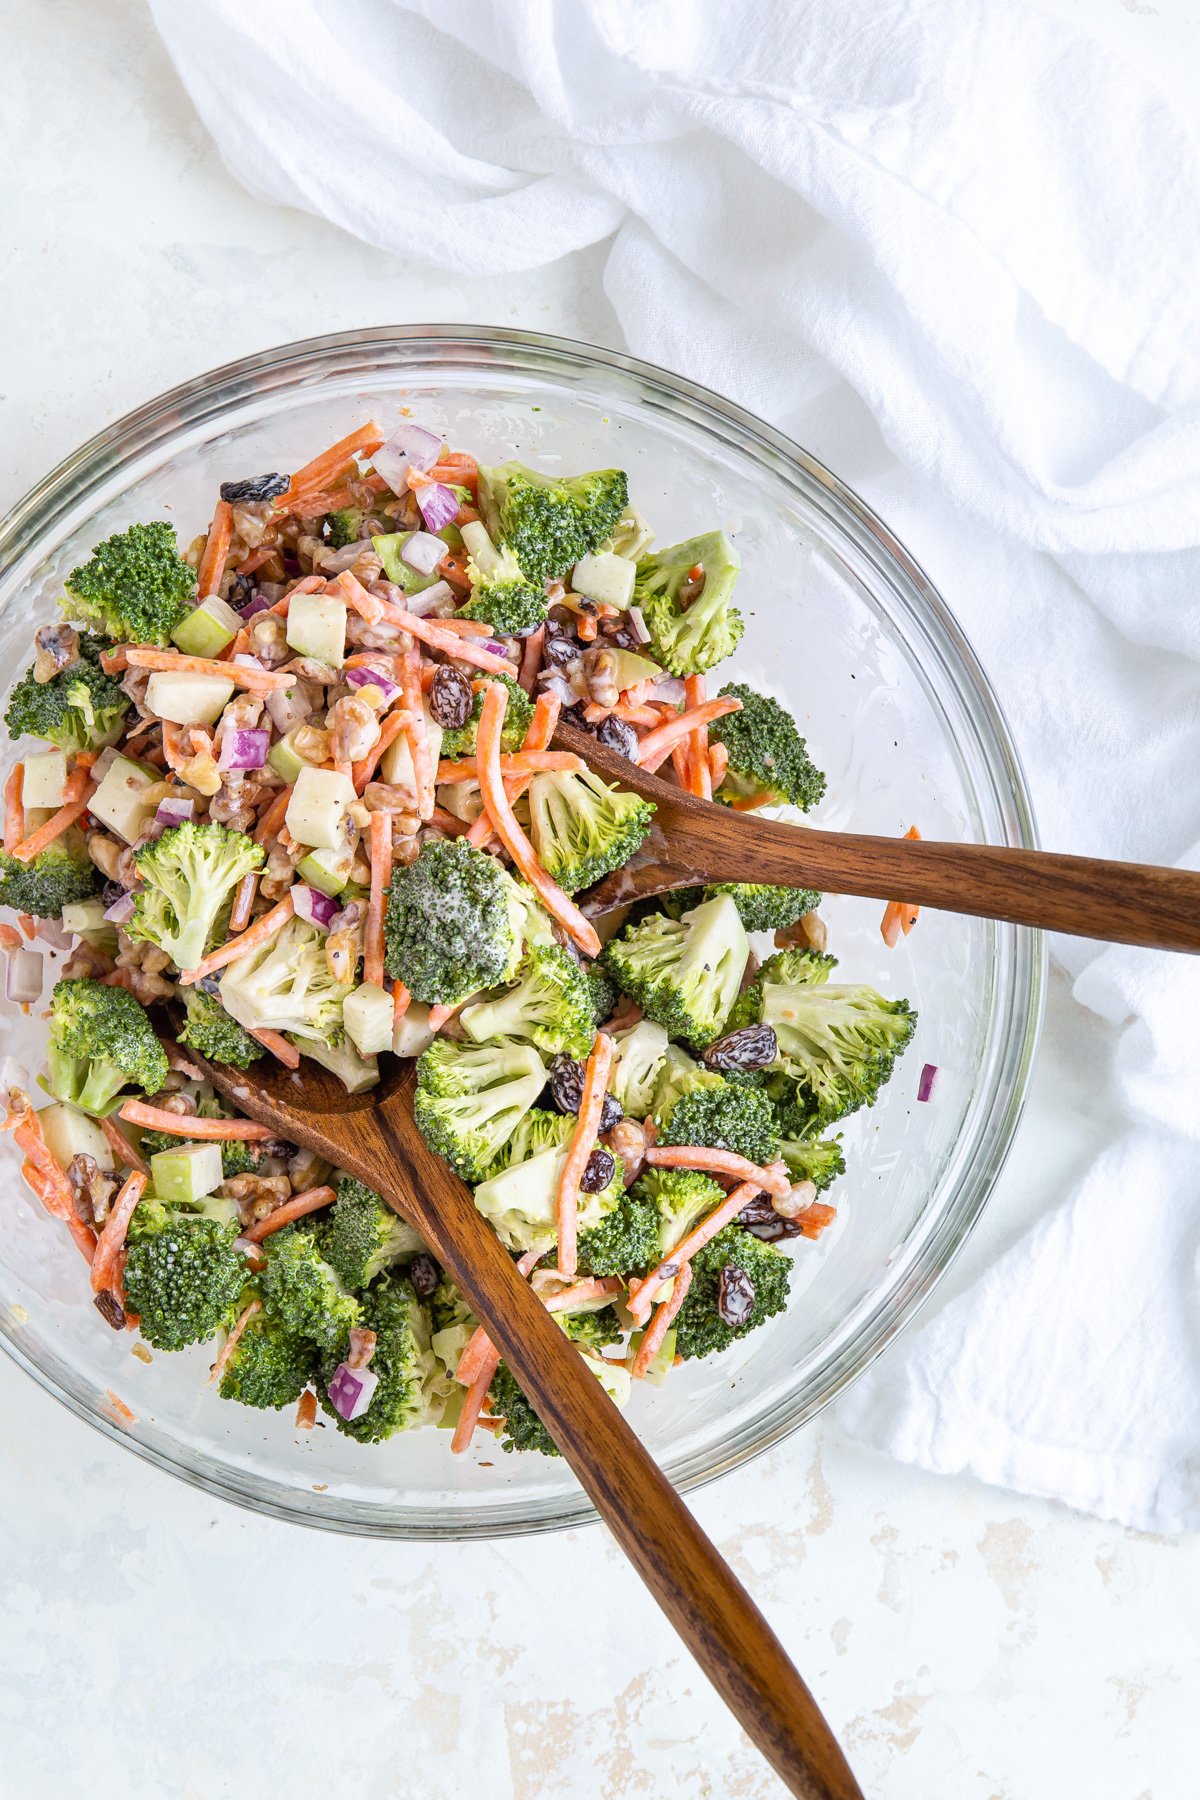 Overhead view of broccoli salad in a bowl with wooden salad servers.